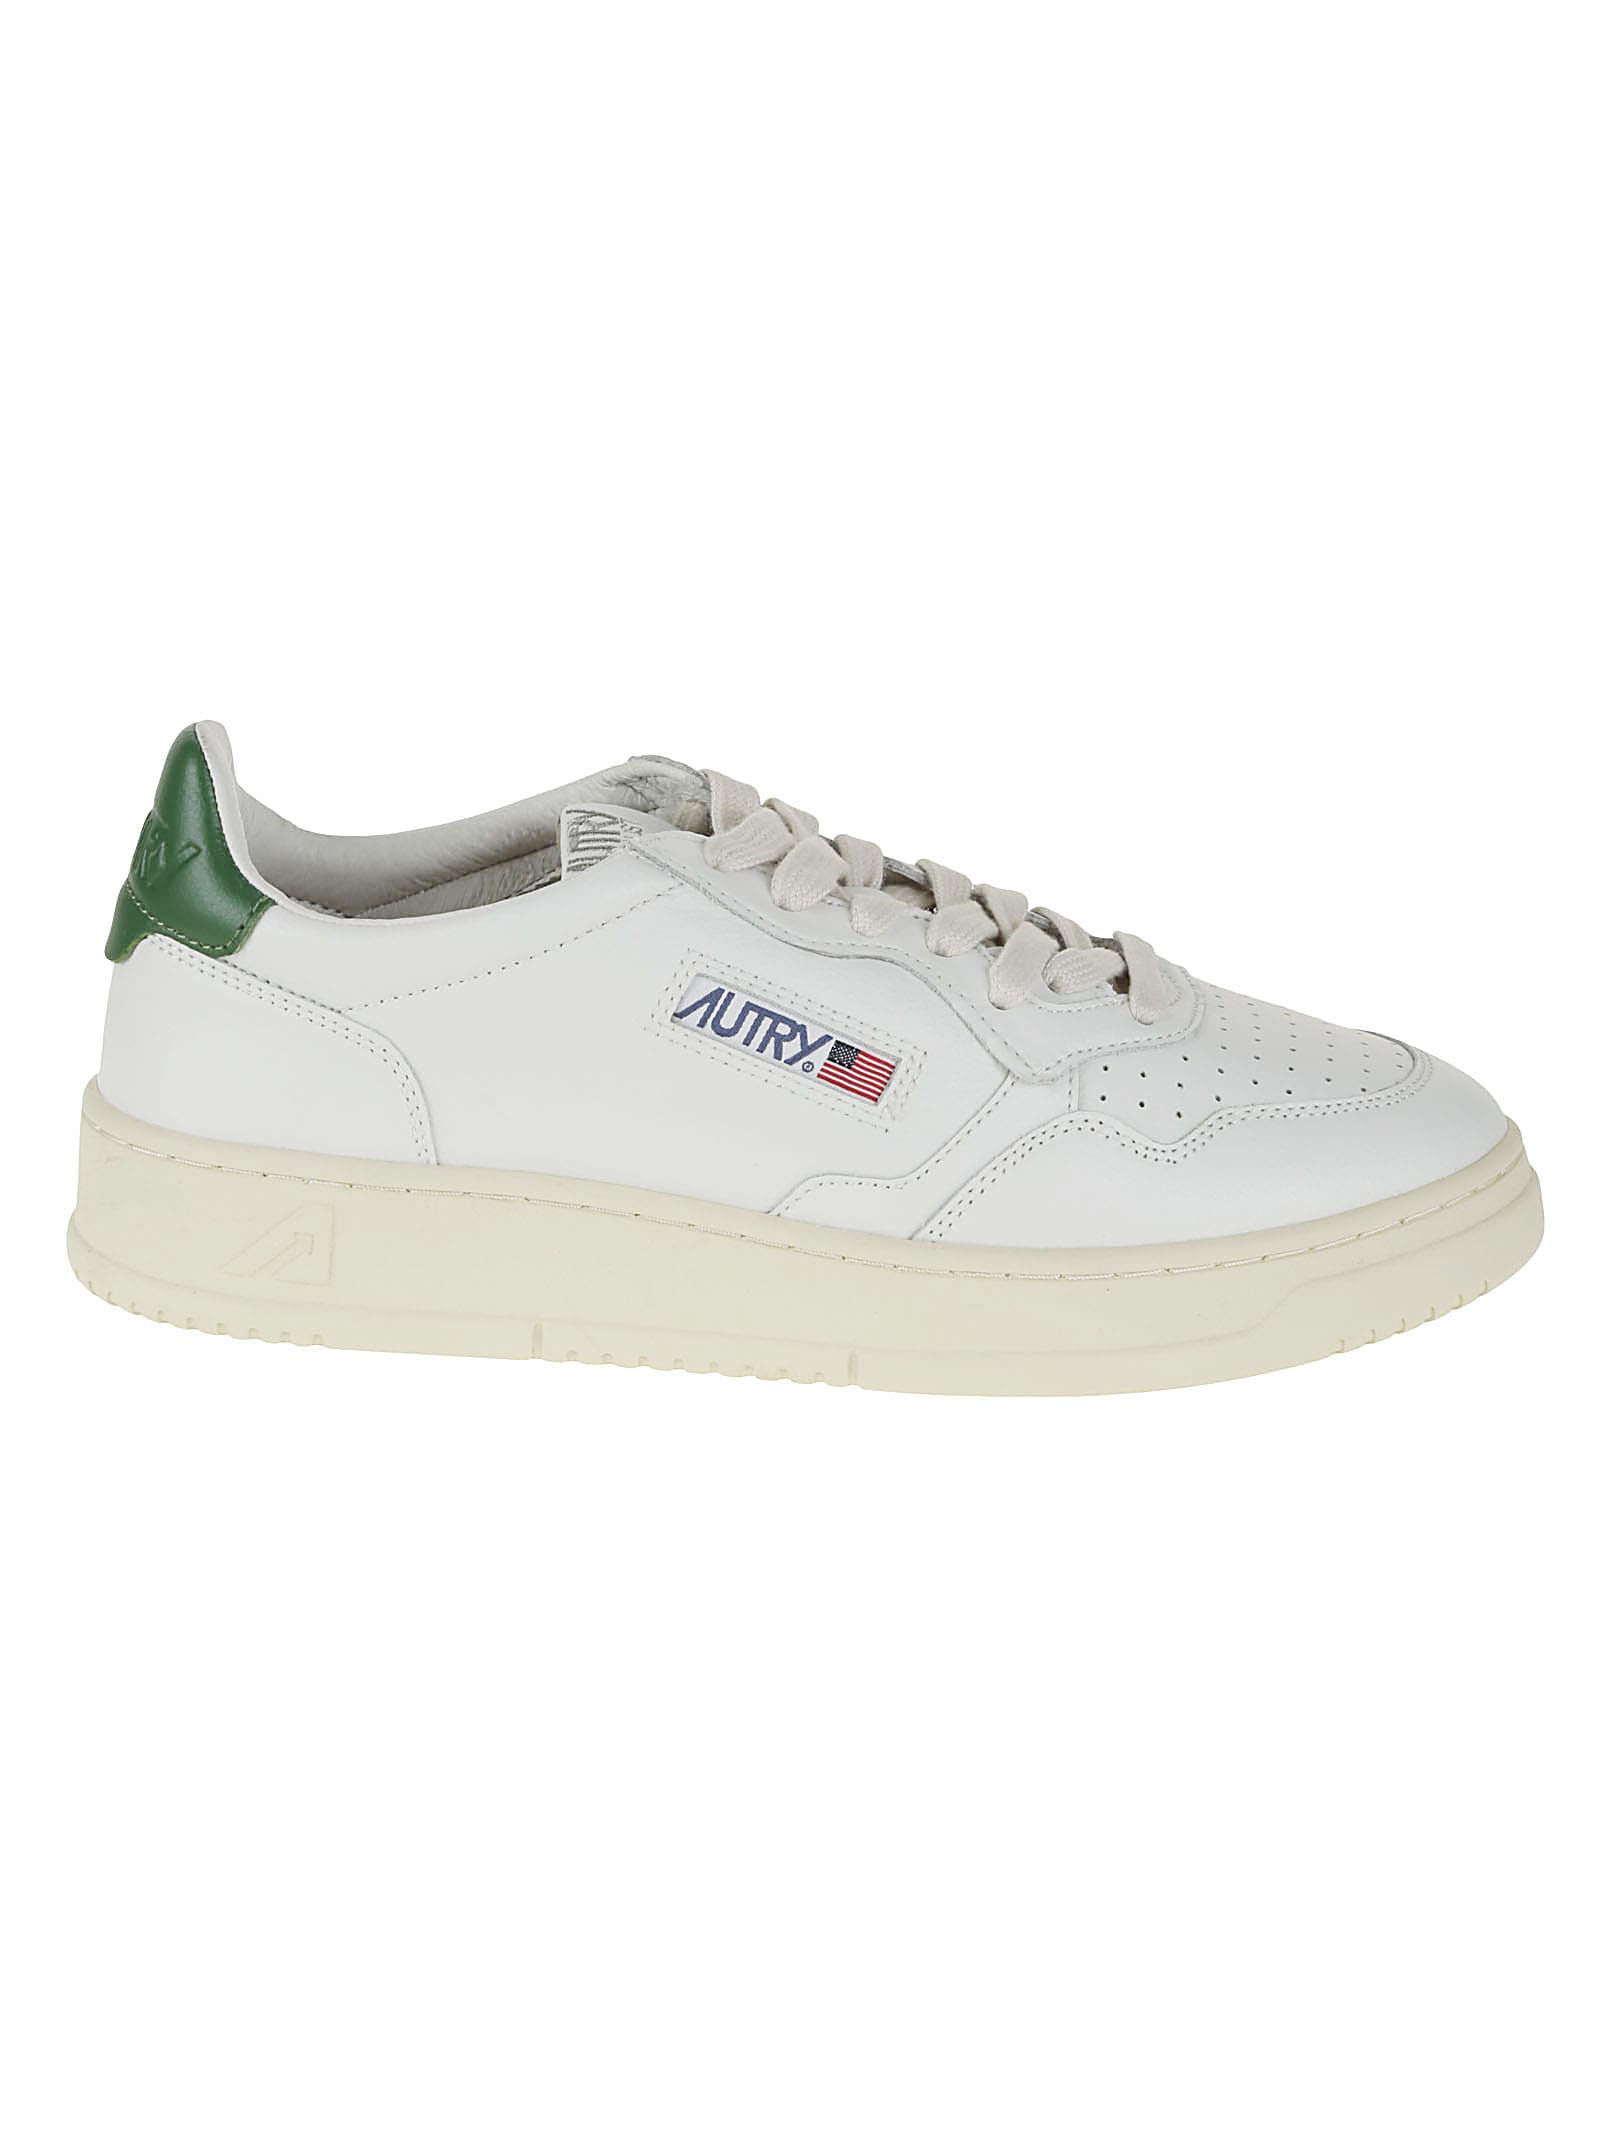 Autry Logo Patched Low Sneakers